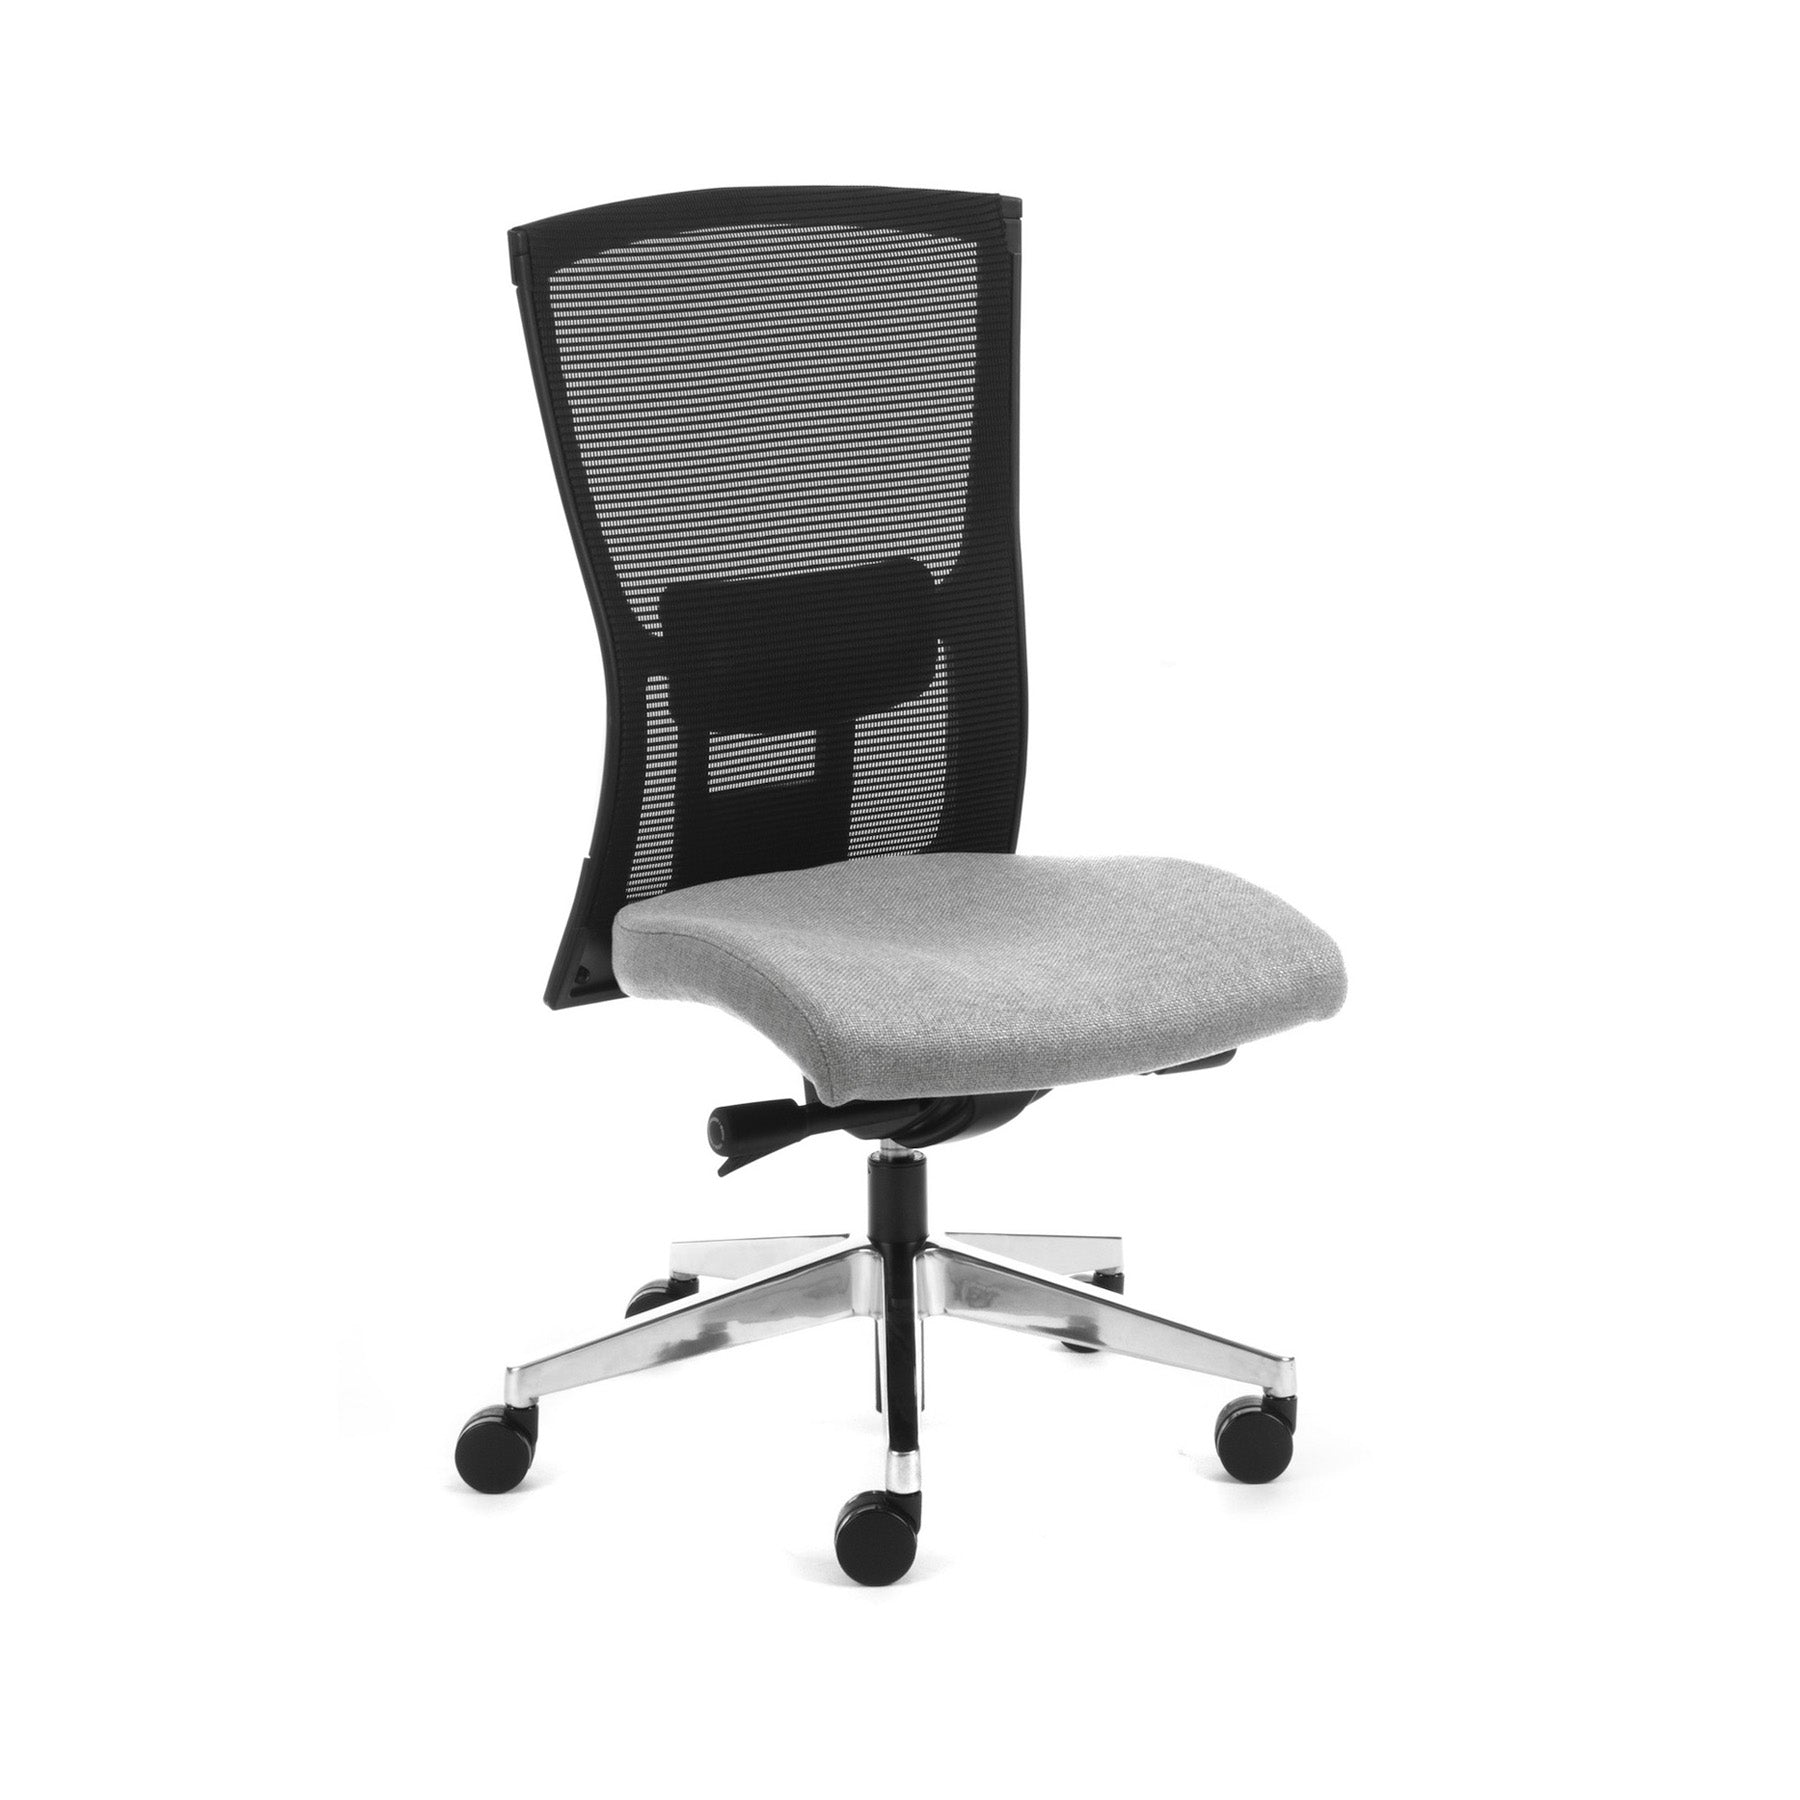 Domino Executive Office Chair